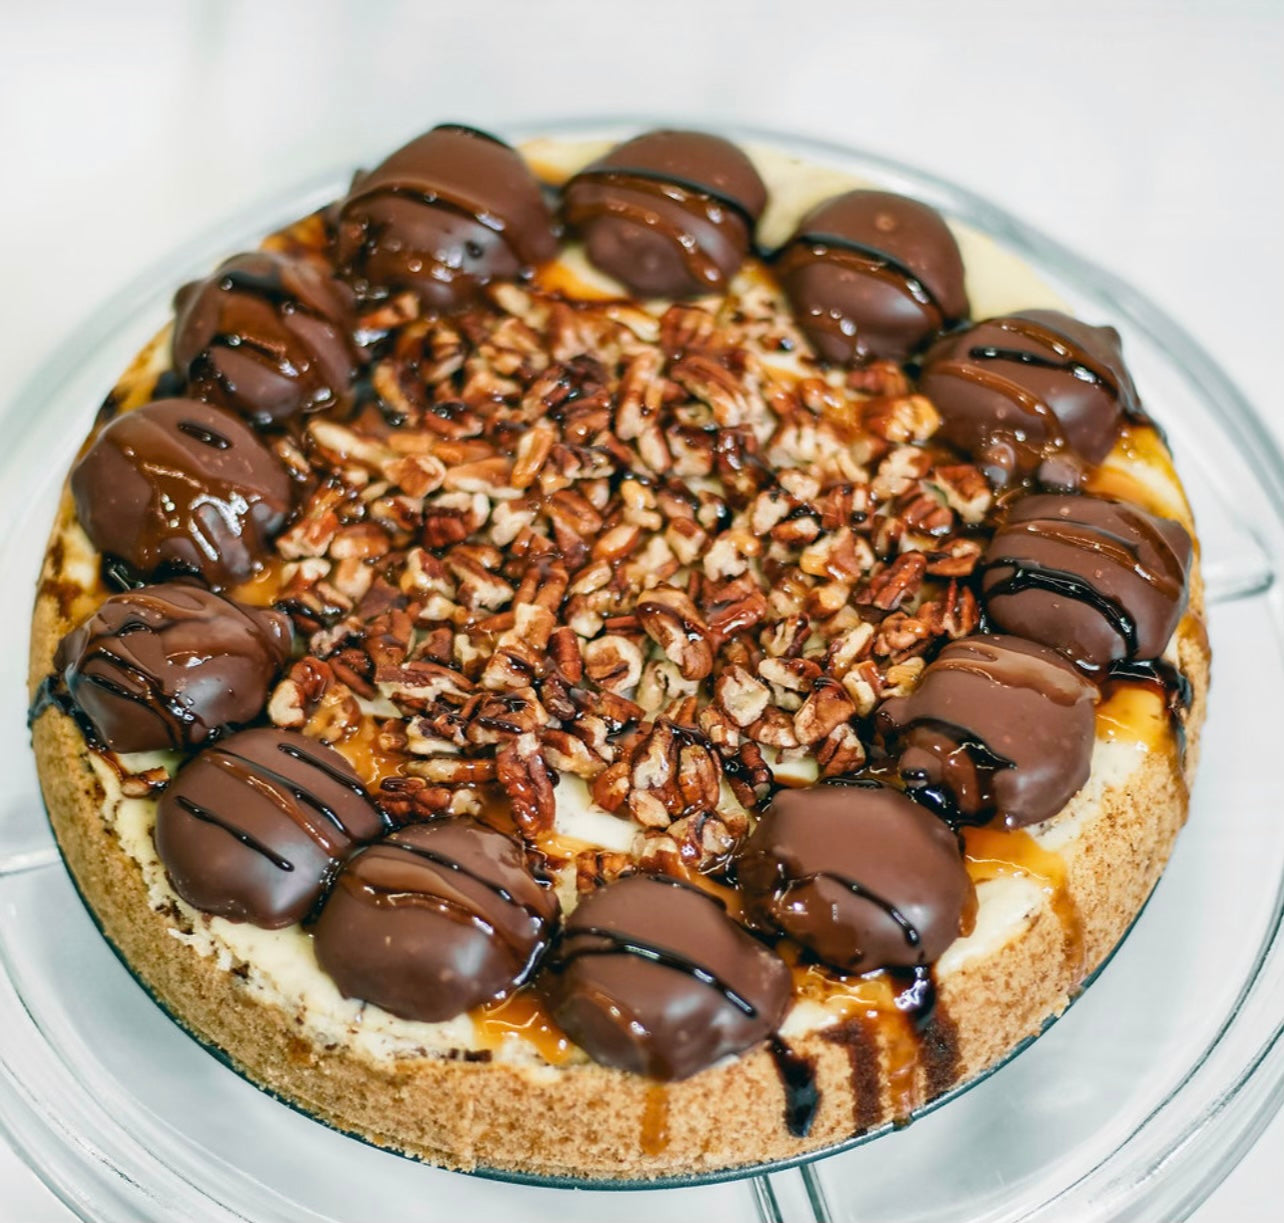 Candy Bar Specialty Cheesecake